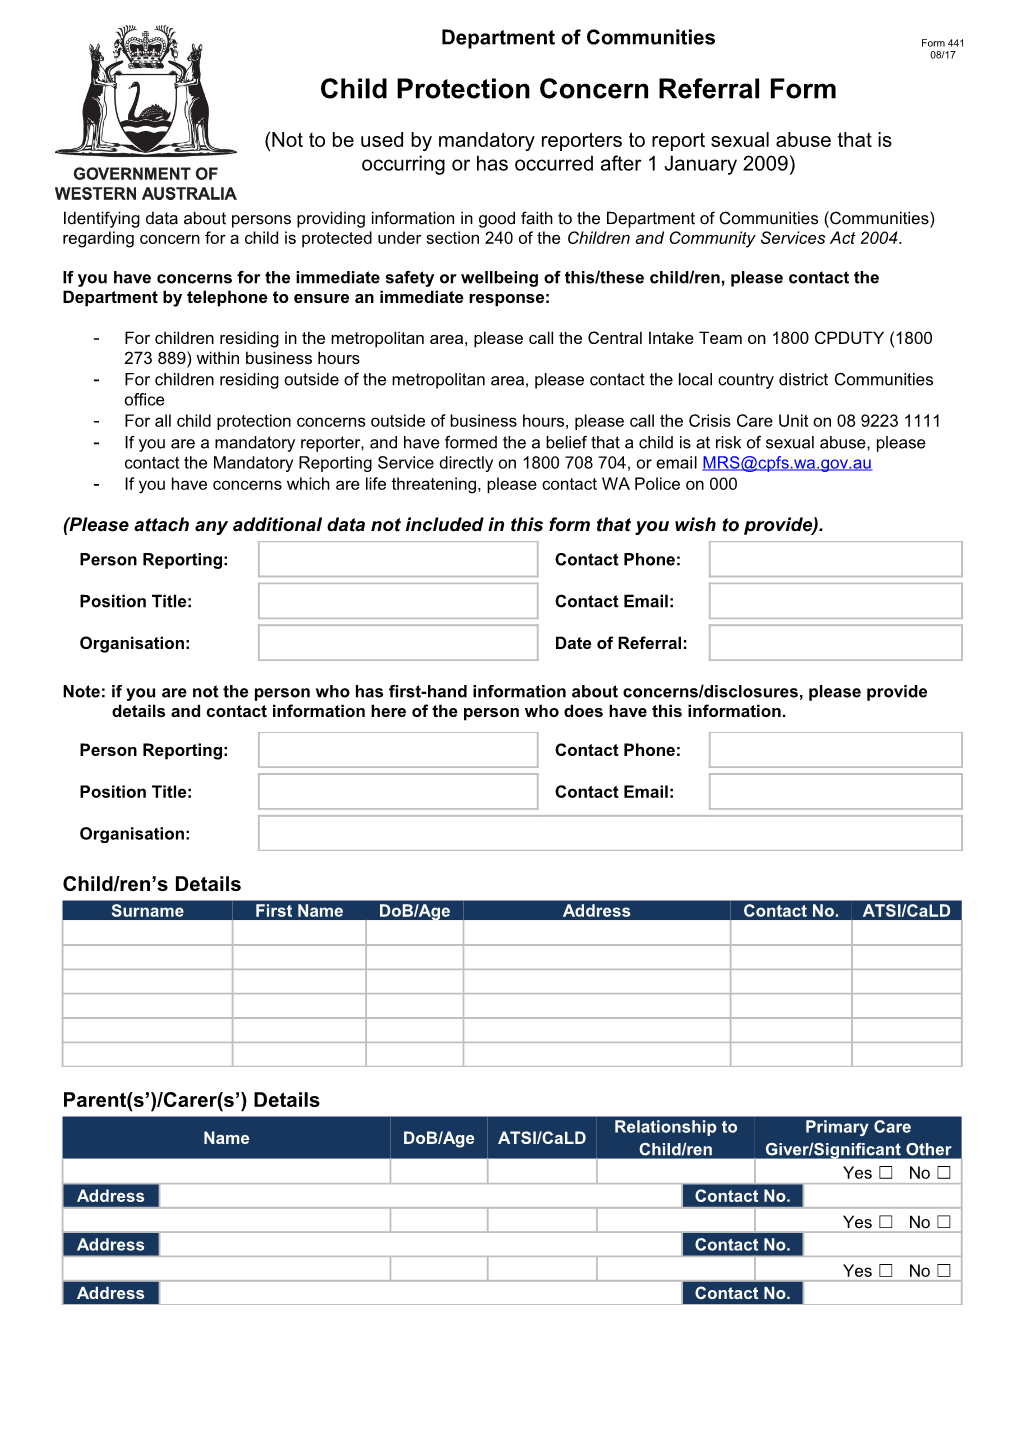 Child Protection Concern Referral Form